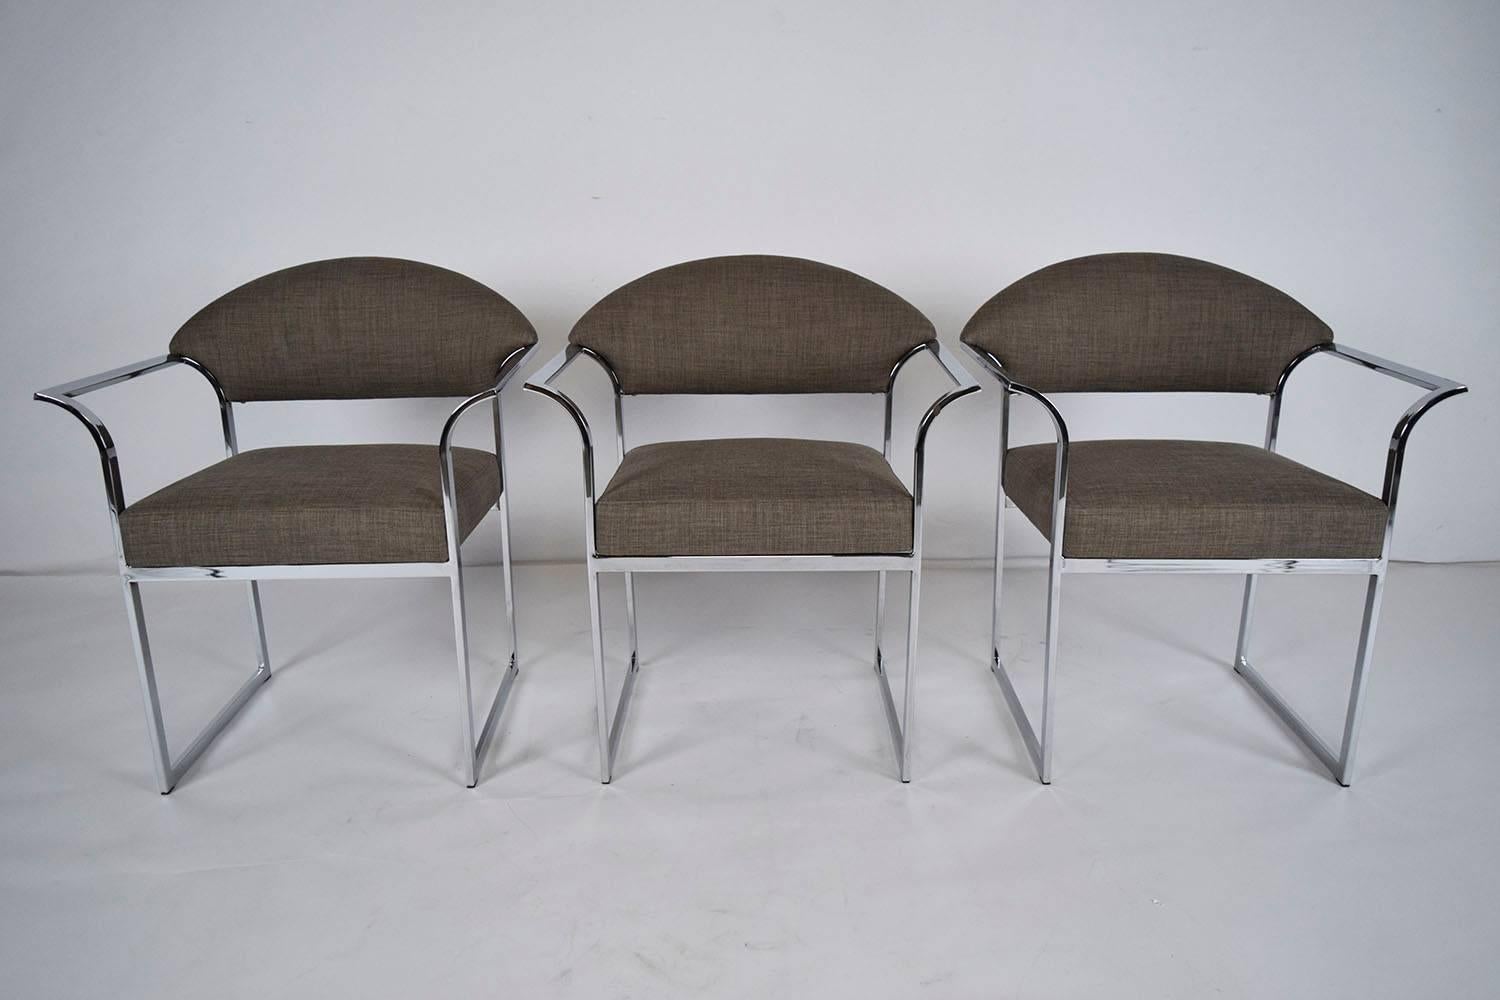 This 1960s vintage set of six Mid-Century Modern style dining chairs feature reflective chrome frames. The simple frame is accented by the winged arm rests that make this set of chairs one of a kind. The chair backs and seats have recently been